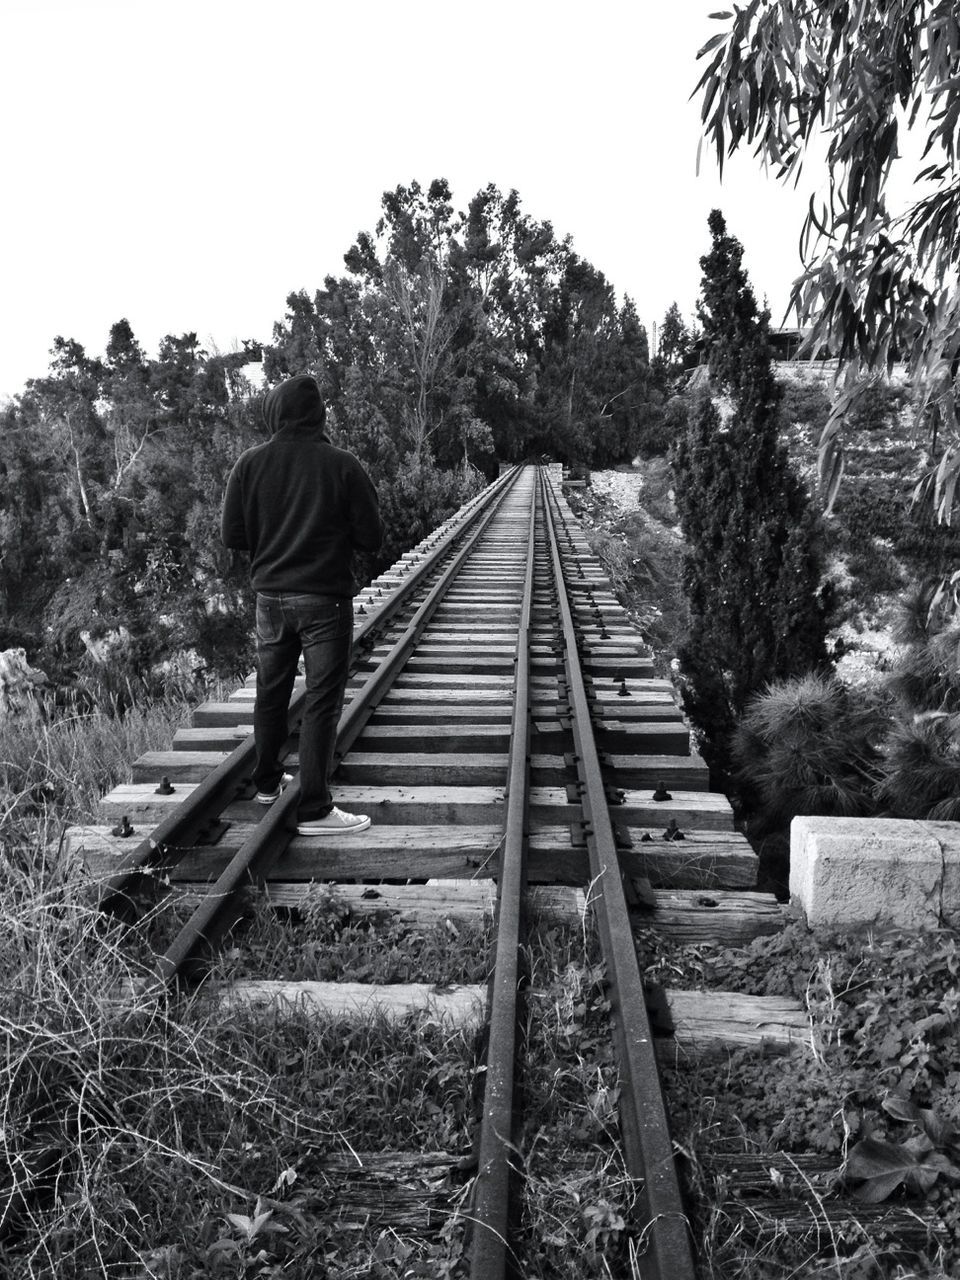 railroad track, tree, the way forward, rail transportation, rear view, clear sky, diminishing perspective, full length, transportation, lifestyles, men, vanishing point, day, growth, steps and staircases, leisure activity, forest, railing